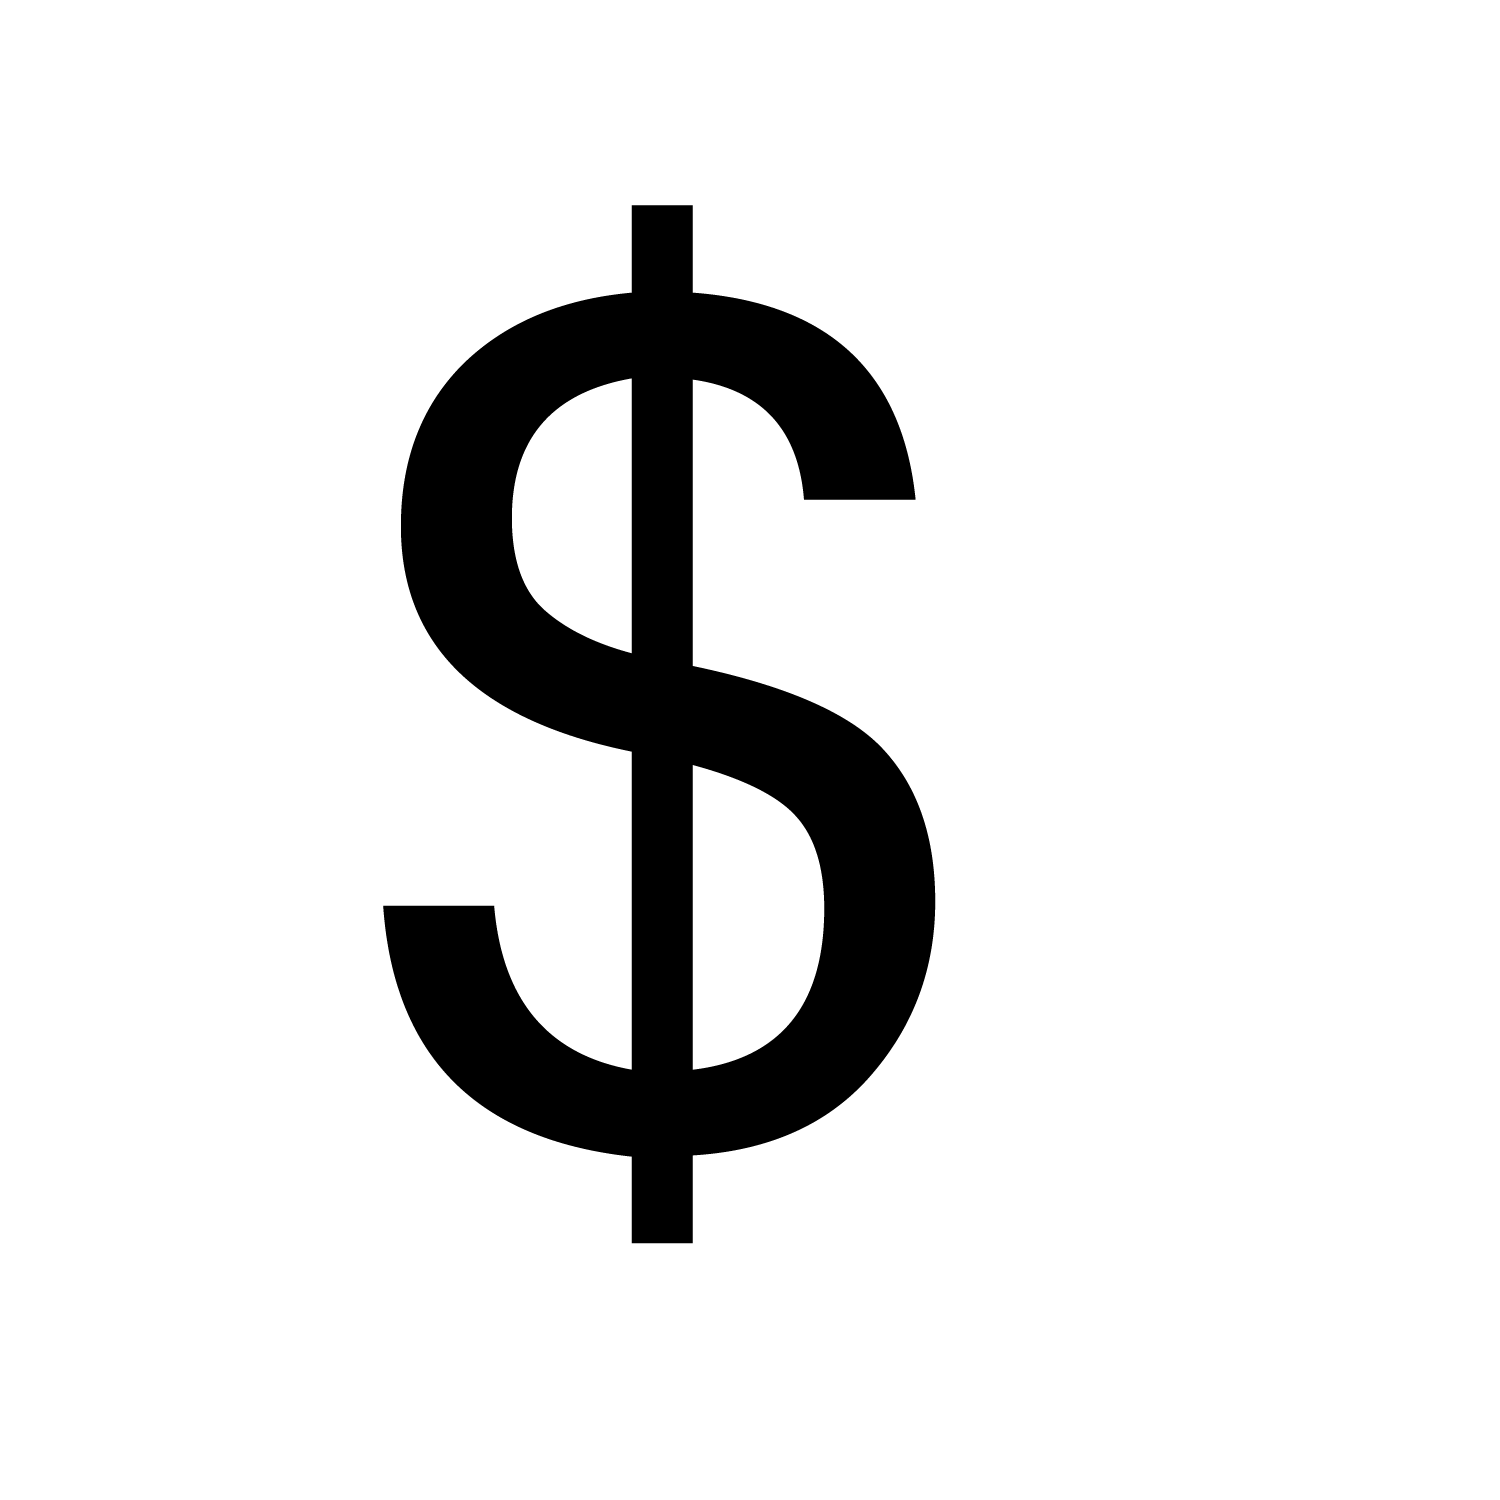 Money Sign Logo - Money sign vector stock no background - RR collections